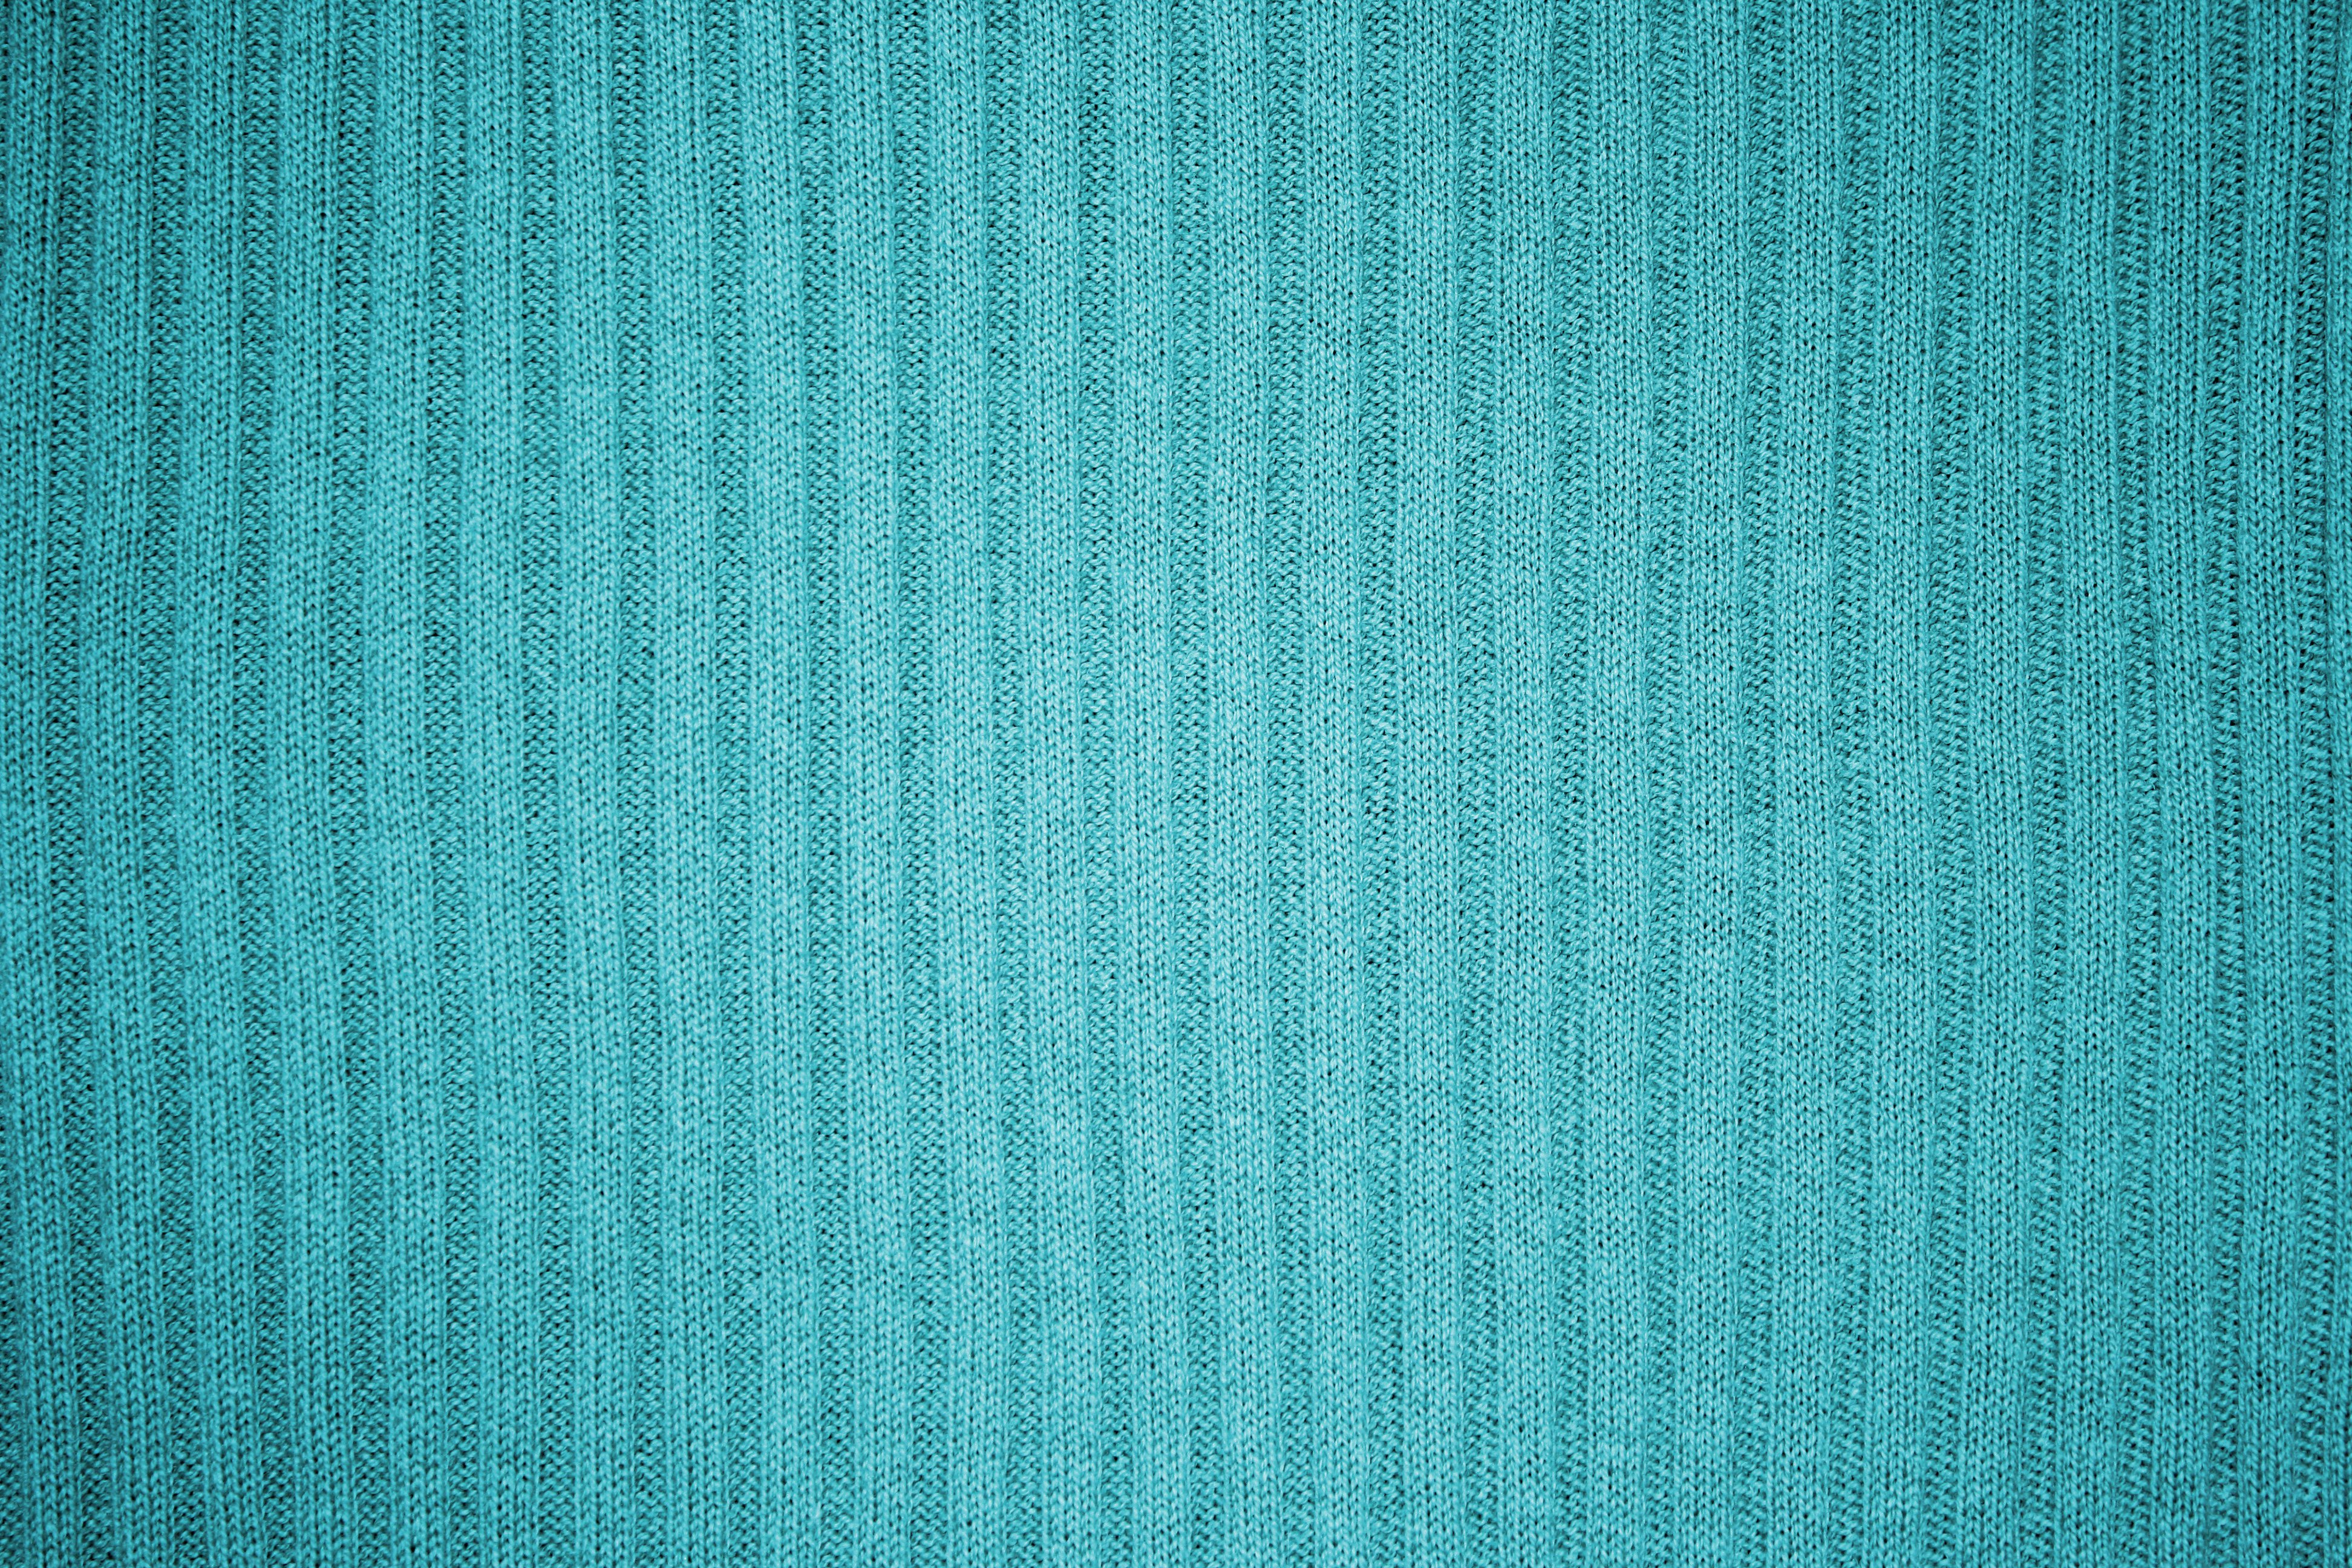 Teal Or Turquoise Ribbed Knit Fabric Texture Picture Photograph